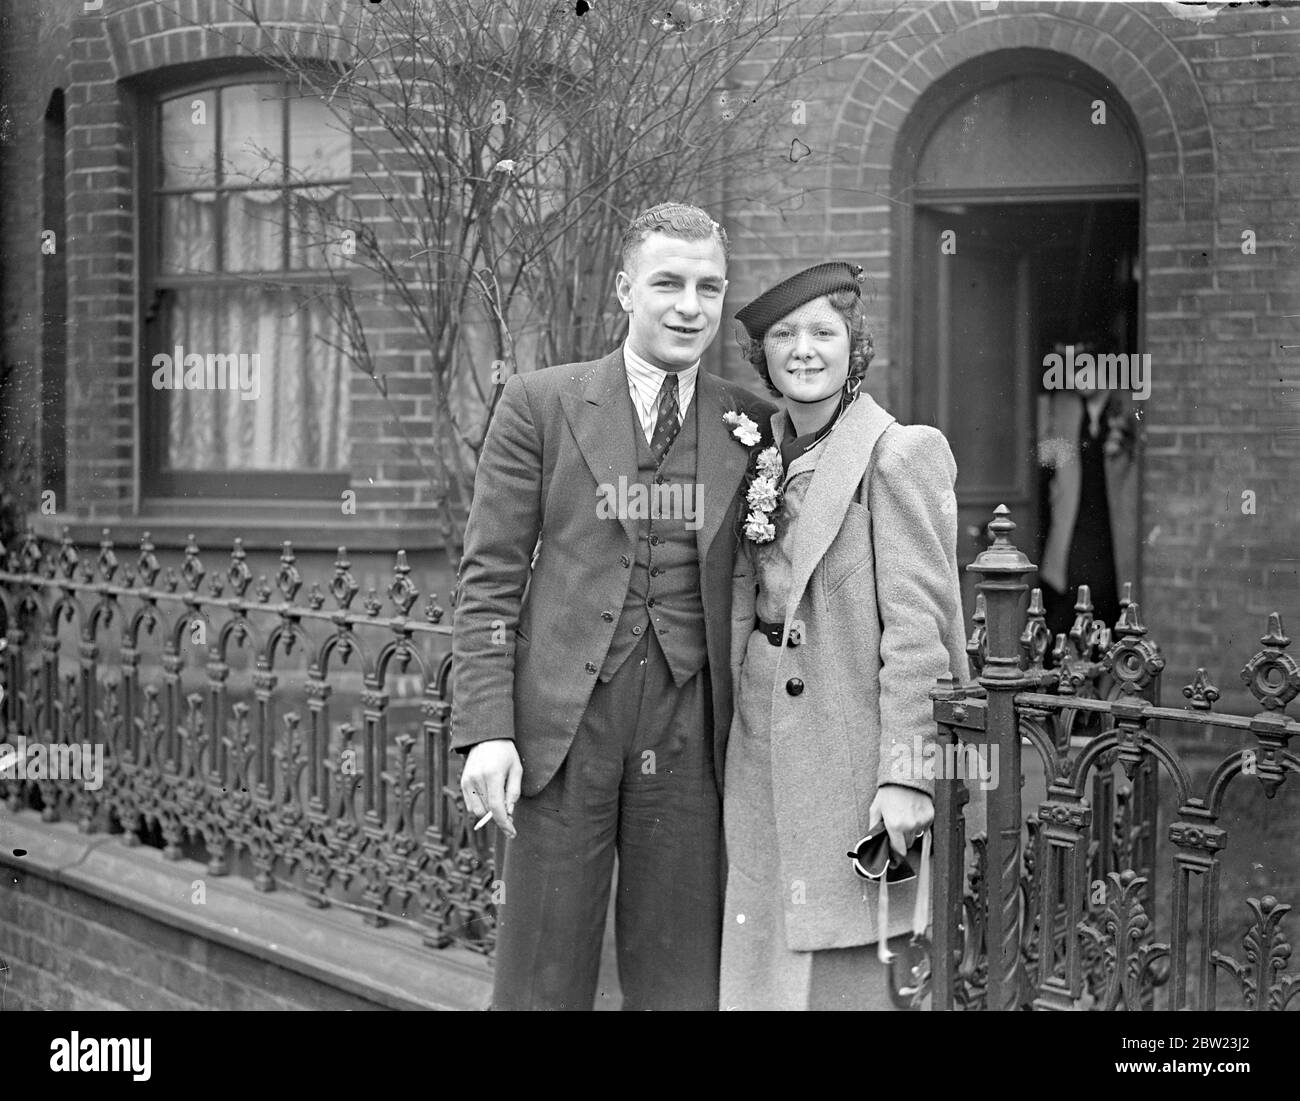 'Ten Goal' Payne married at Luton. Brides Lucky horseshoe. Joe (Ten Goal) Payne, famous Luton town football club forward, was married at Luton register office (Beds) to Miss Peggy Howe, aged 22, tester in a Luton factory. Afterwards, Payne played for Luton against Bradford. His bride watched the match. 26 February 1938 Stock Photo